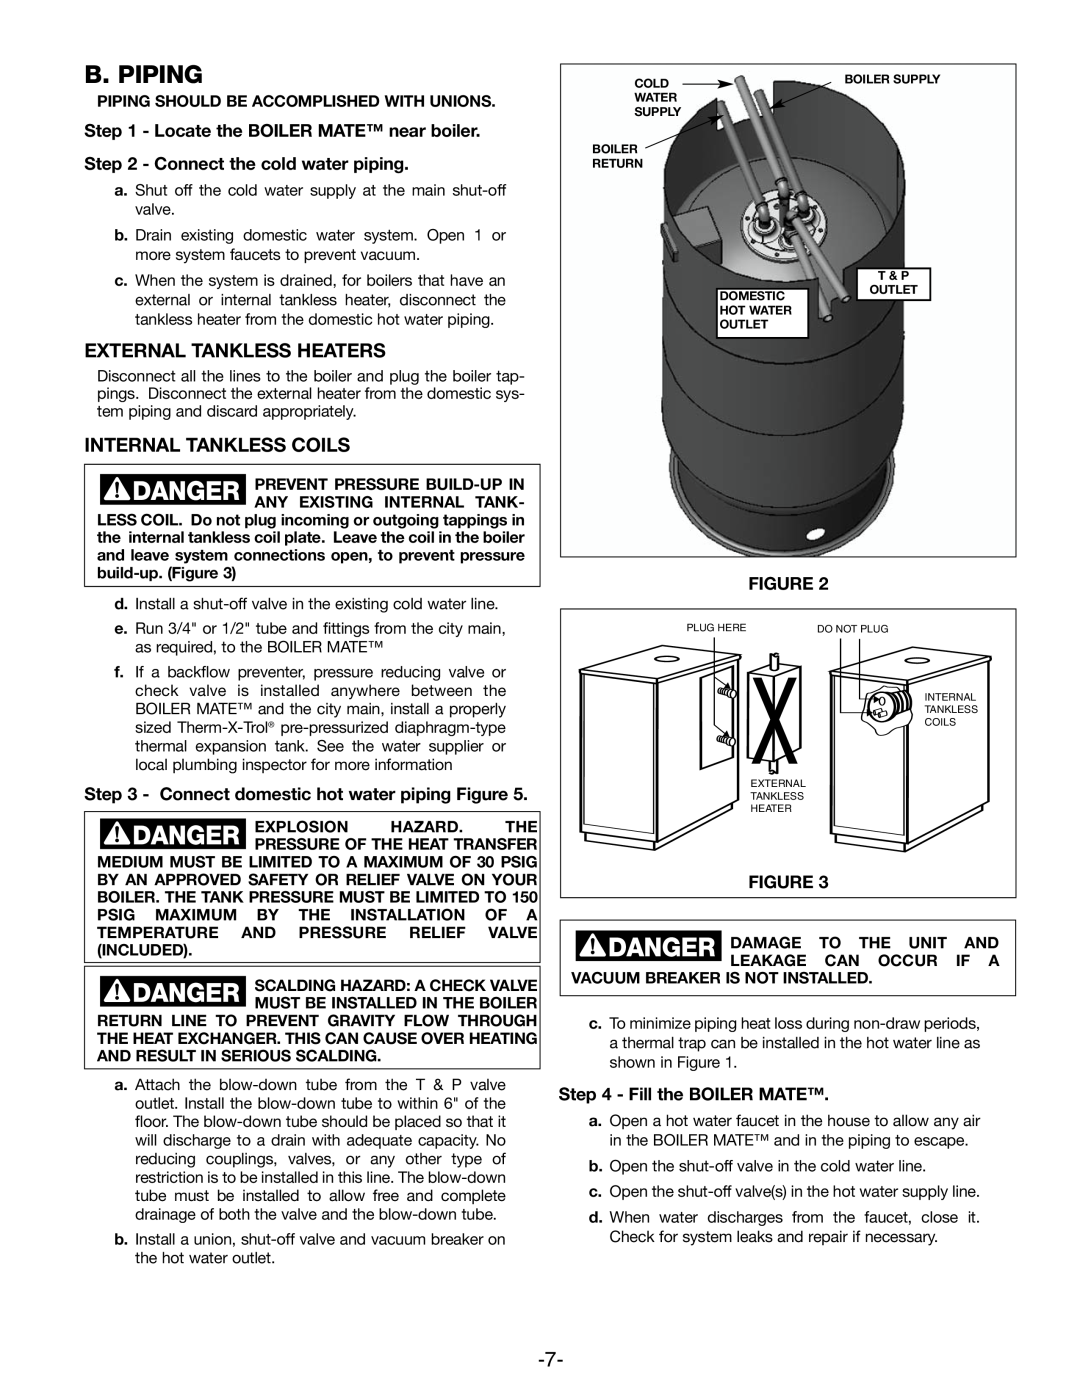 Amtrol TD-41ZDW manual B. Piping, External Tankless Heaters, Internal Tankless Coils, Locate the BOILER MATE near boiler 